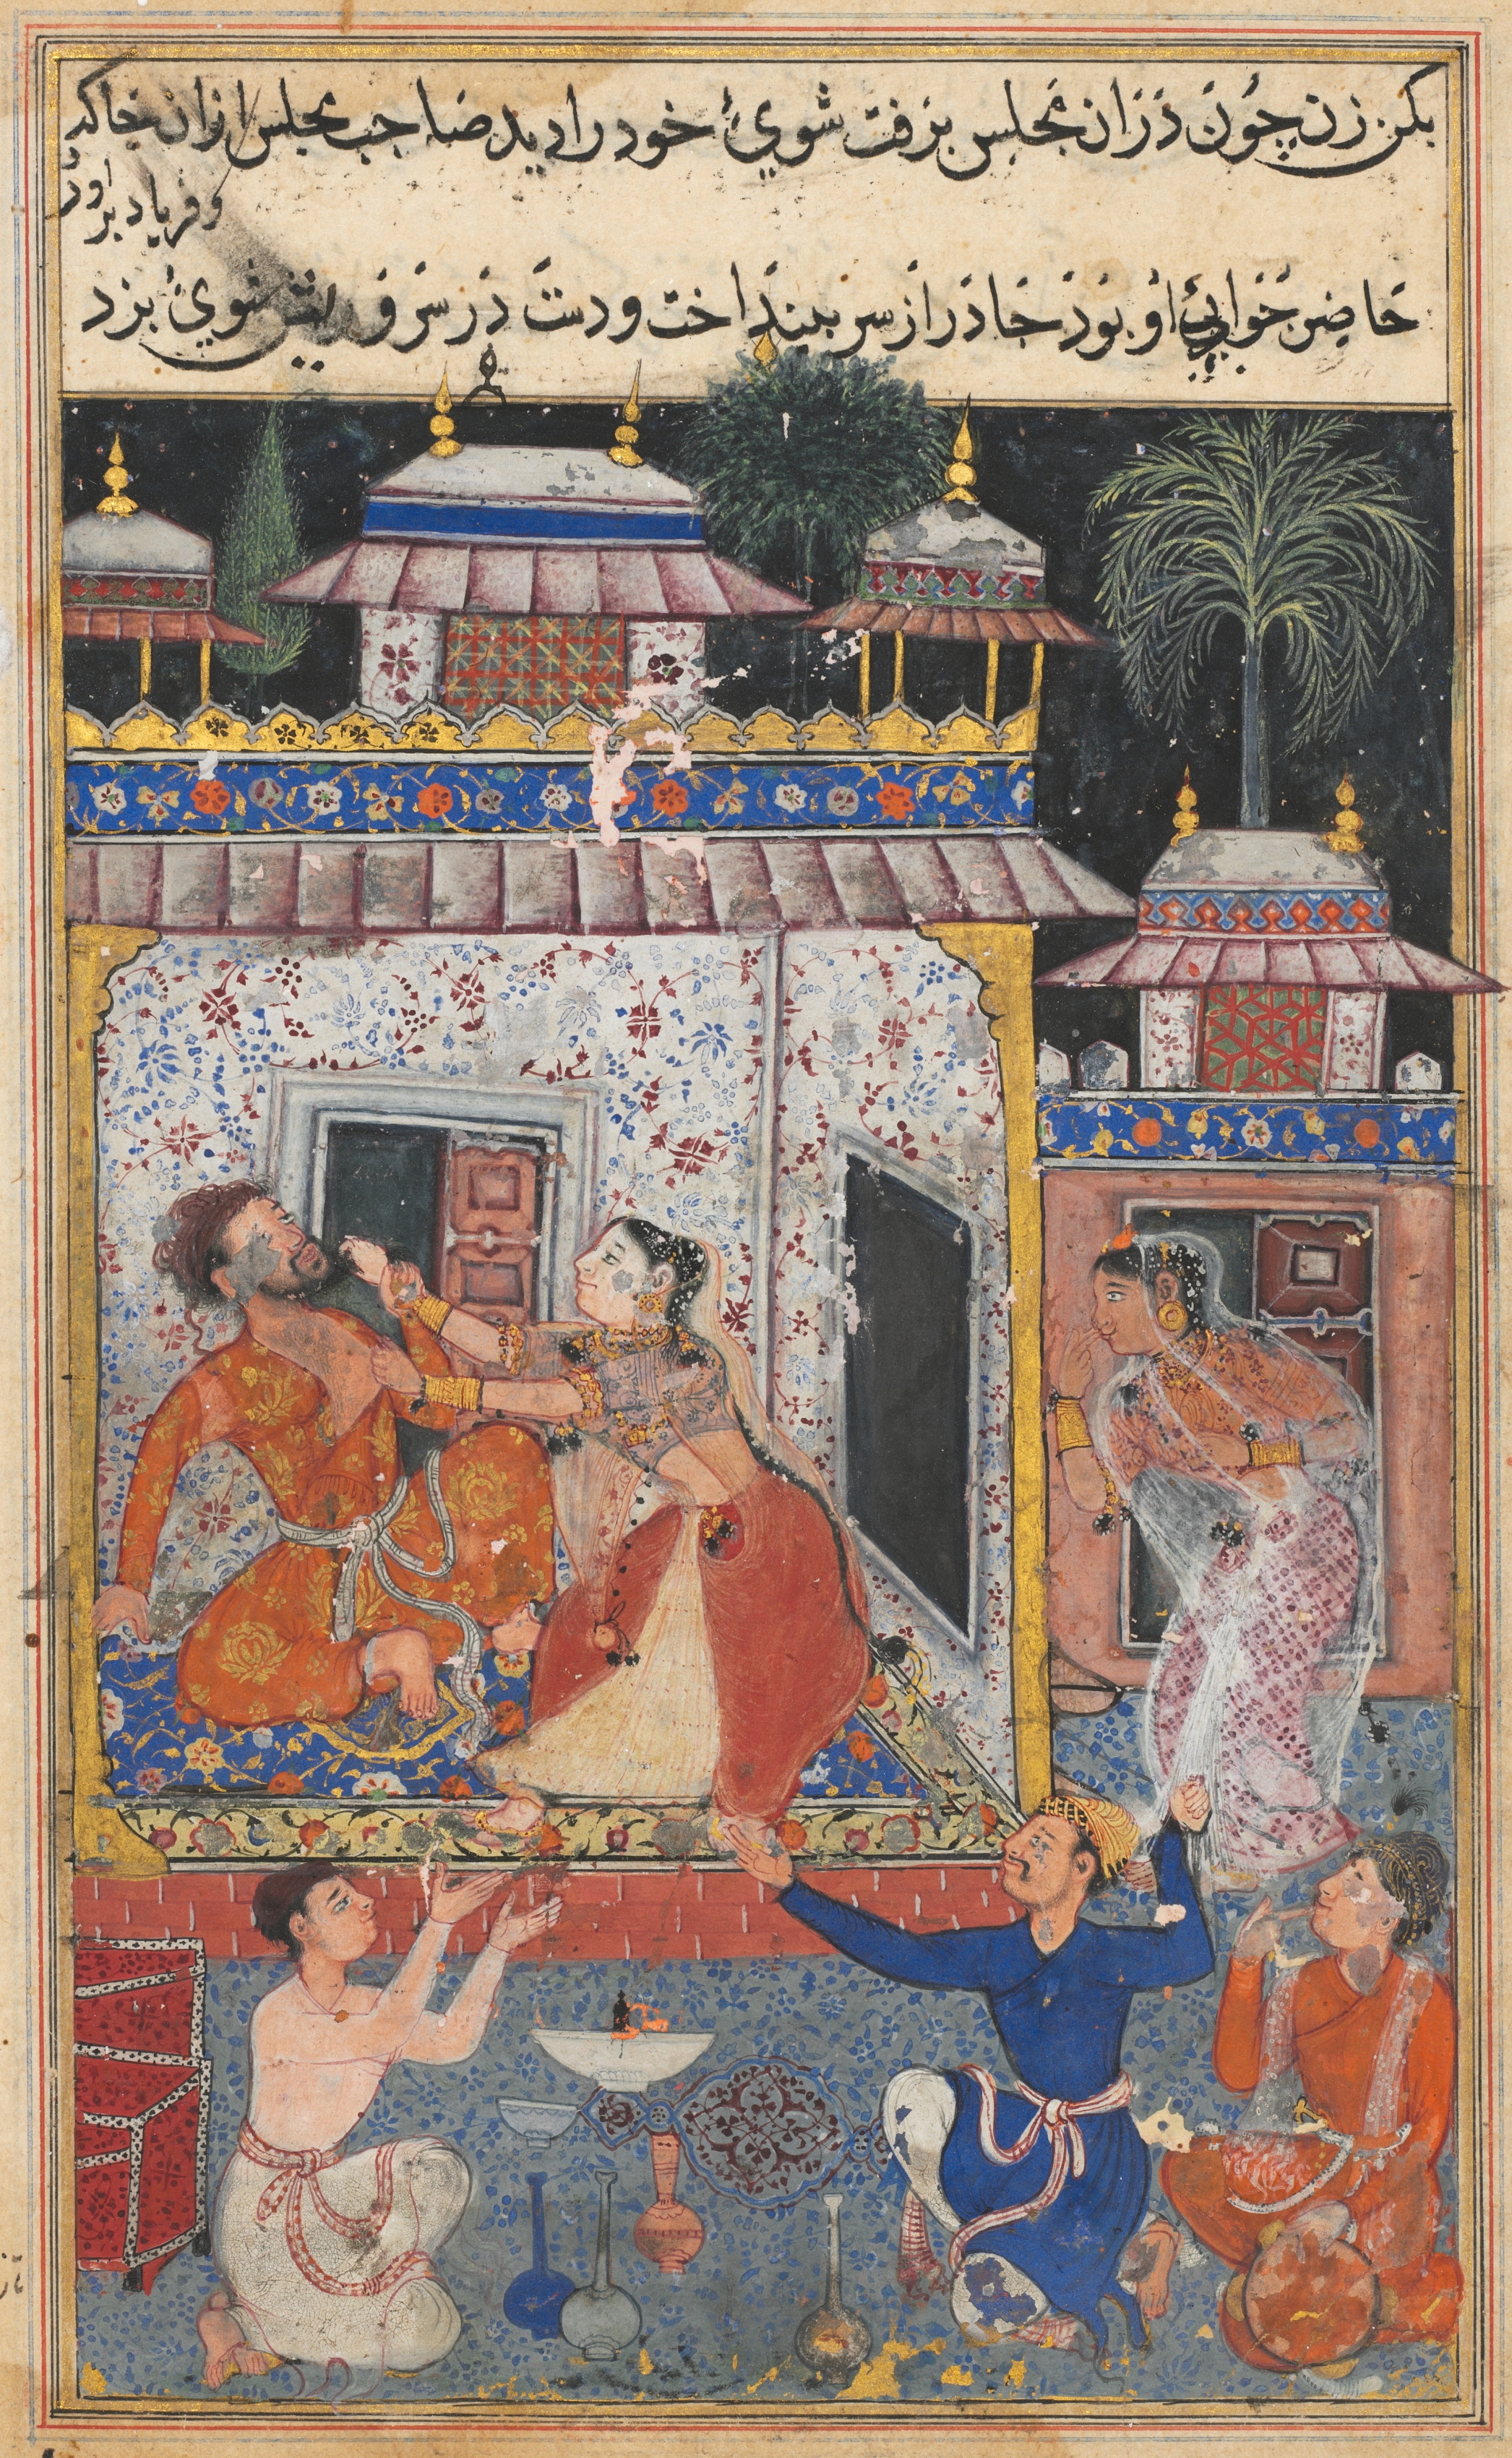 The deceitful wife assaults her erring husband, from a Tuti-nama (Tales of a Parrot): Eighth Night